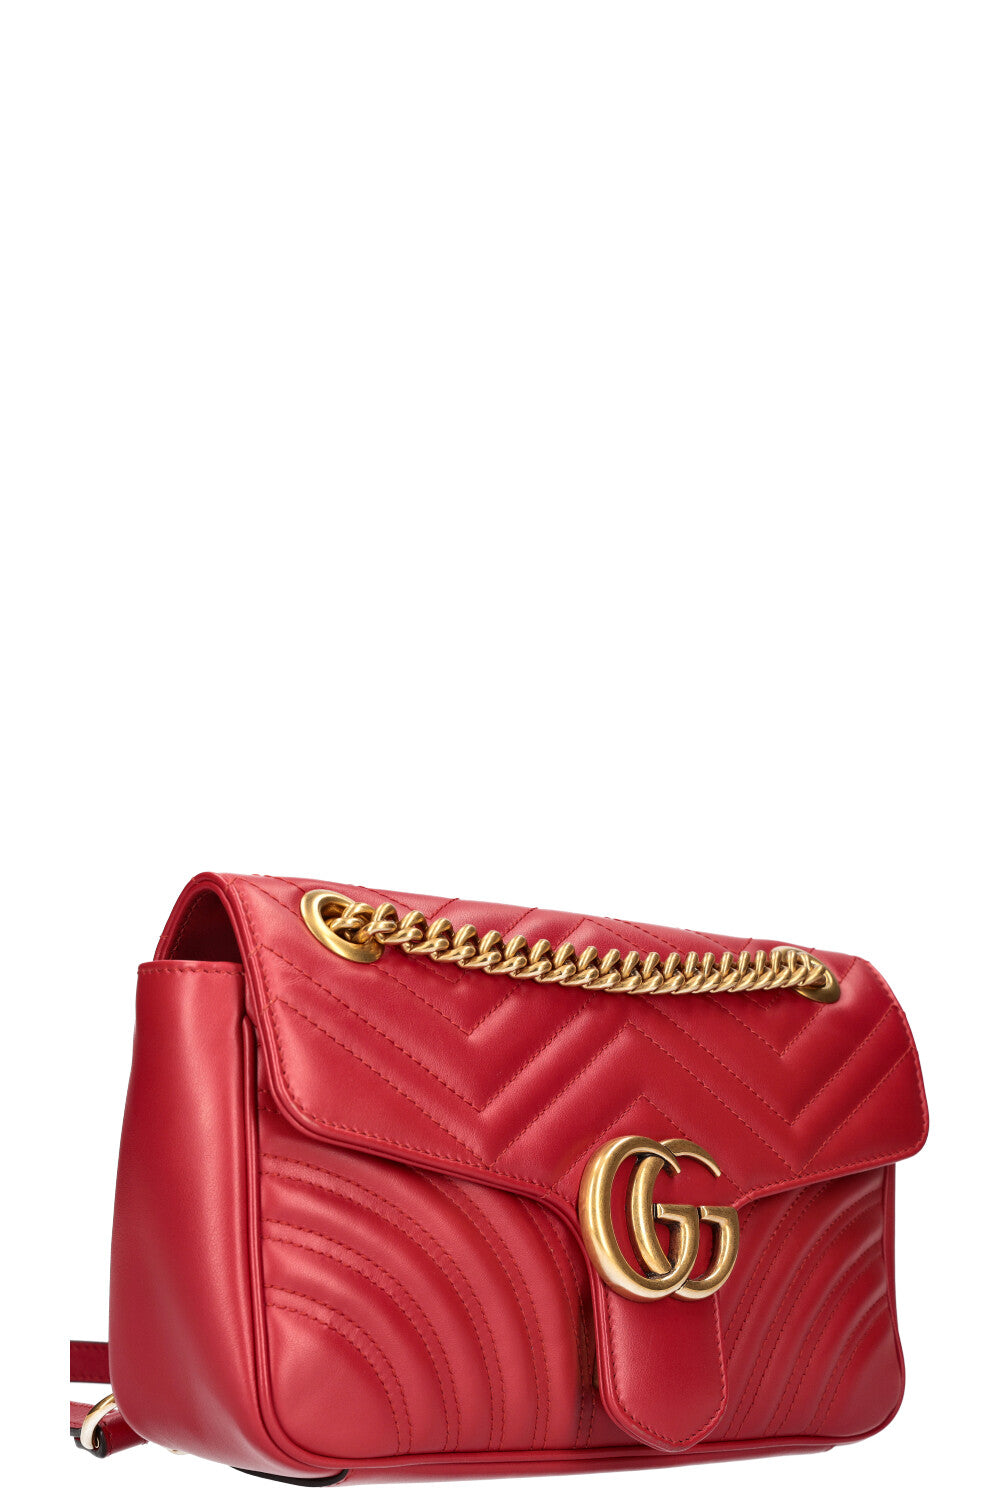 GUCCI Marmont Bag Small Red